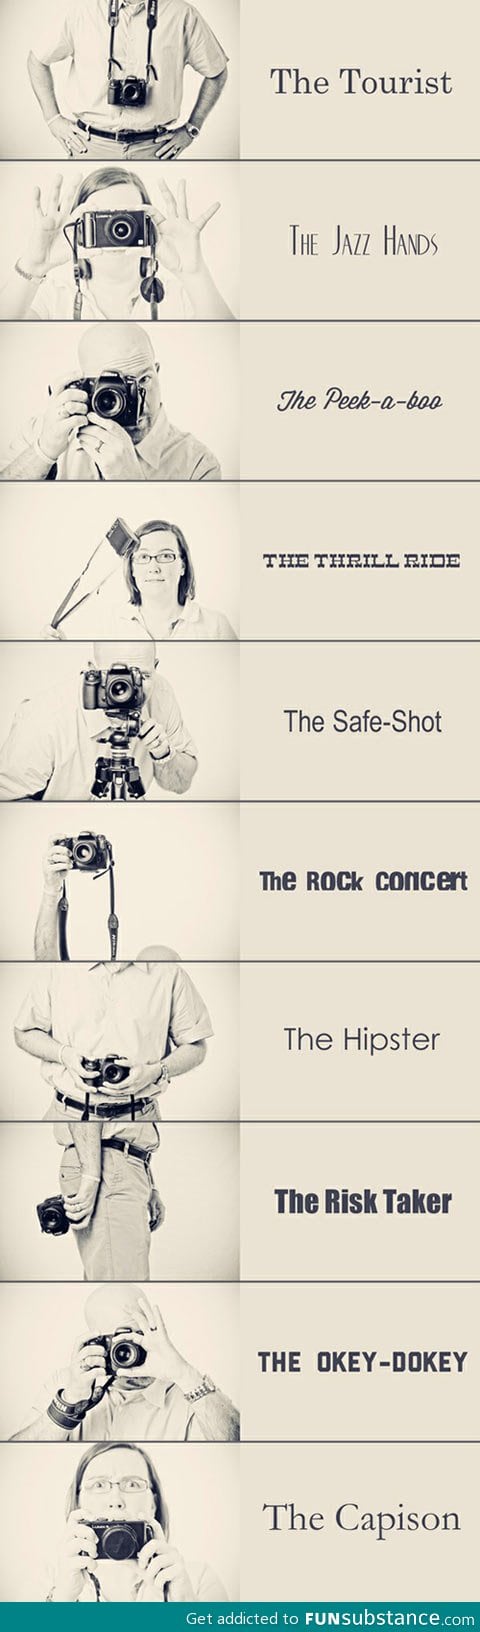 Different types of photographers